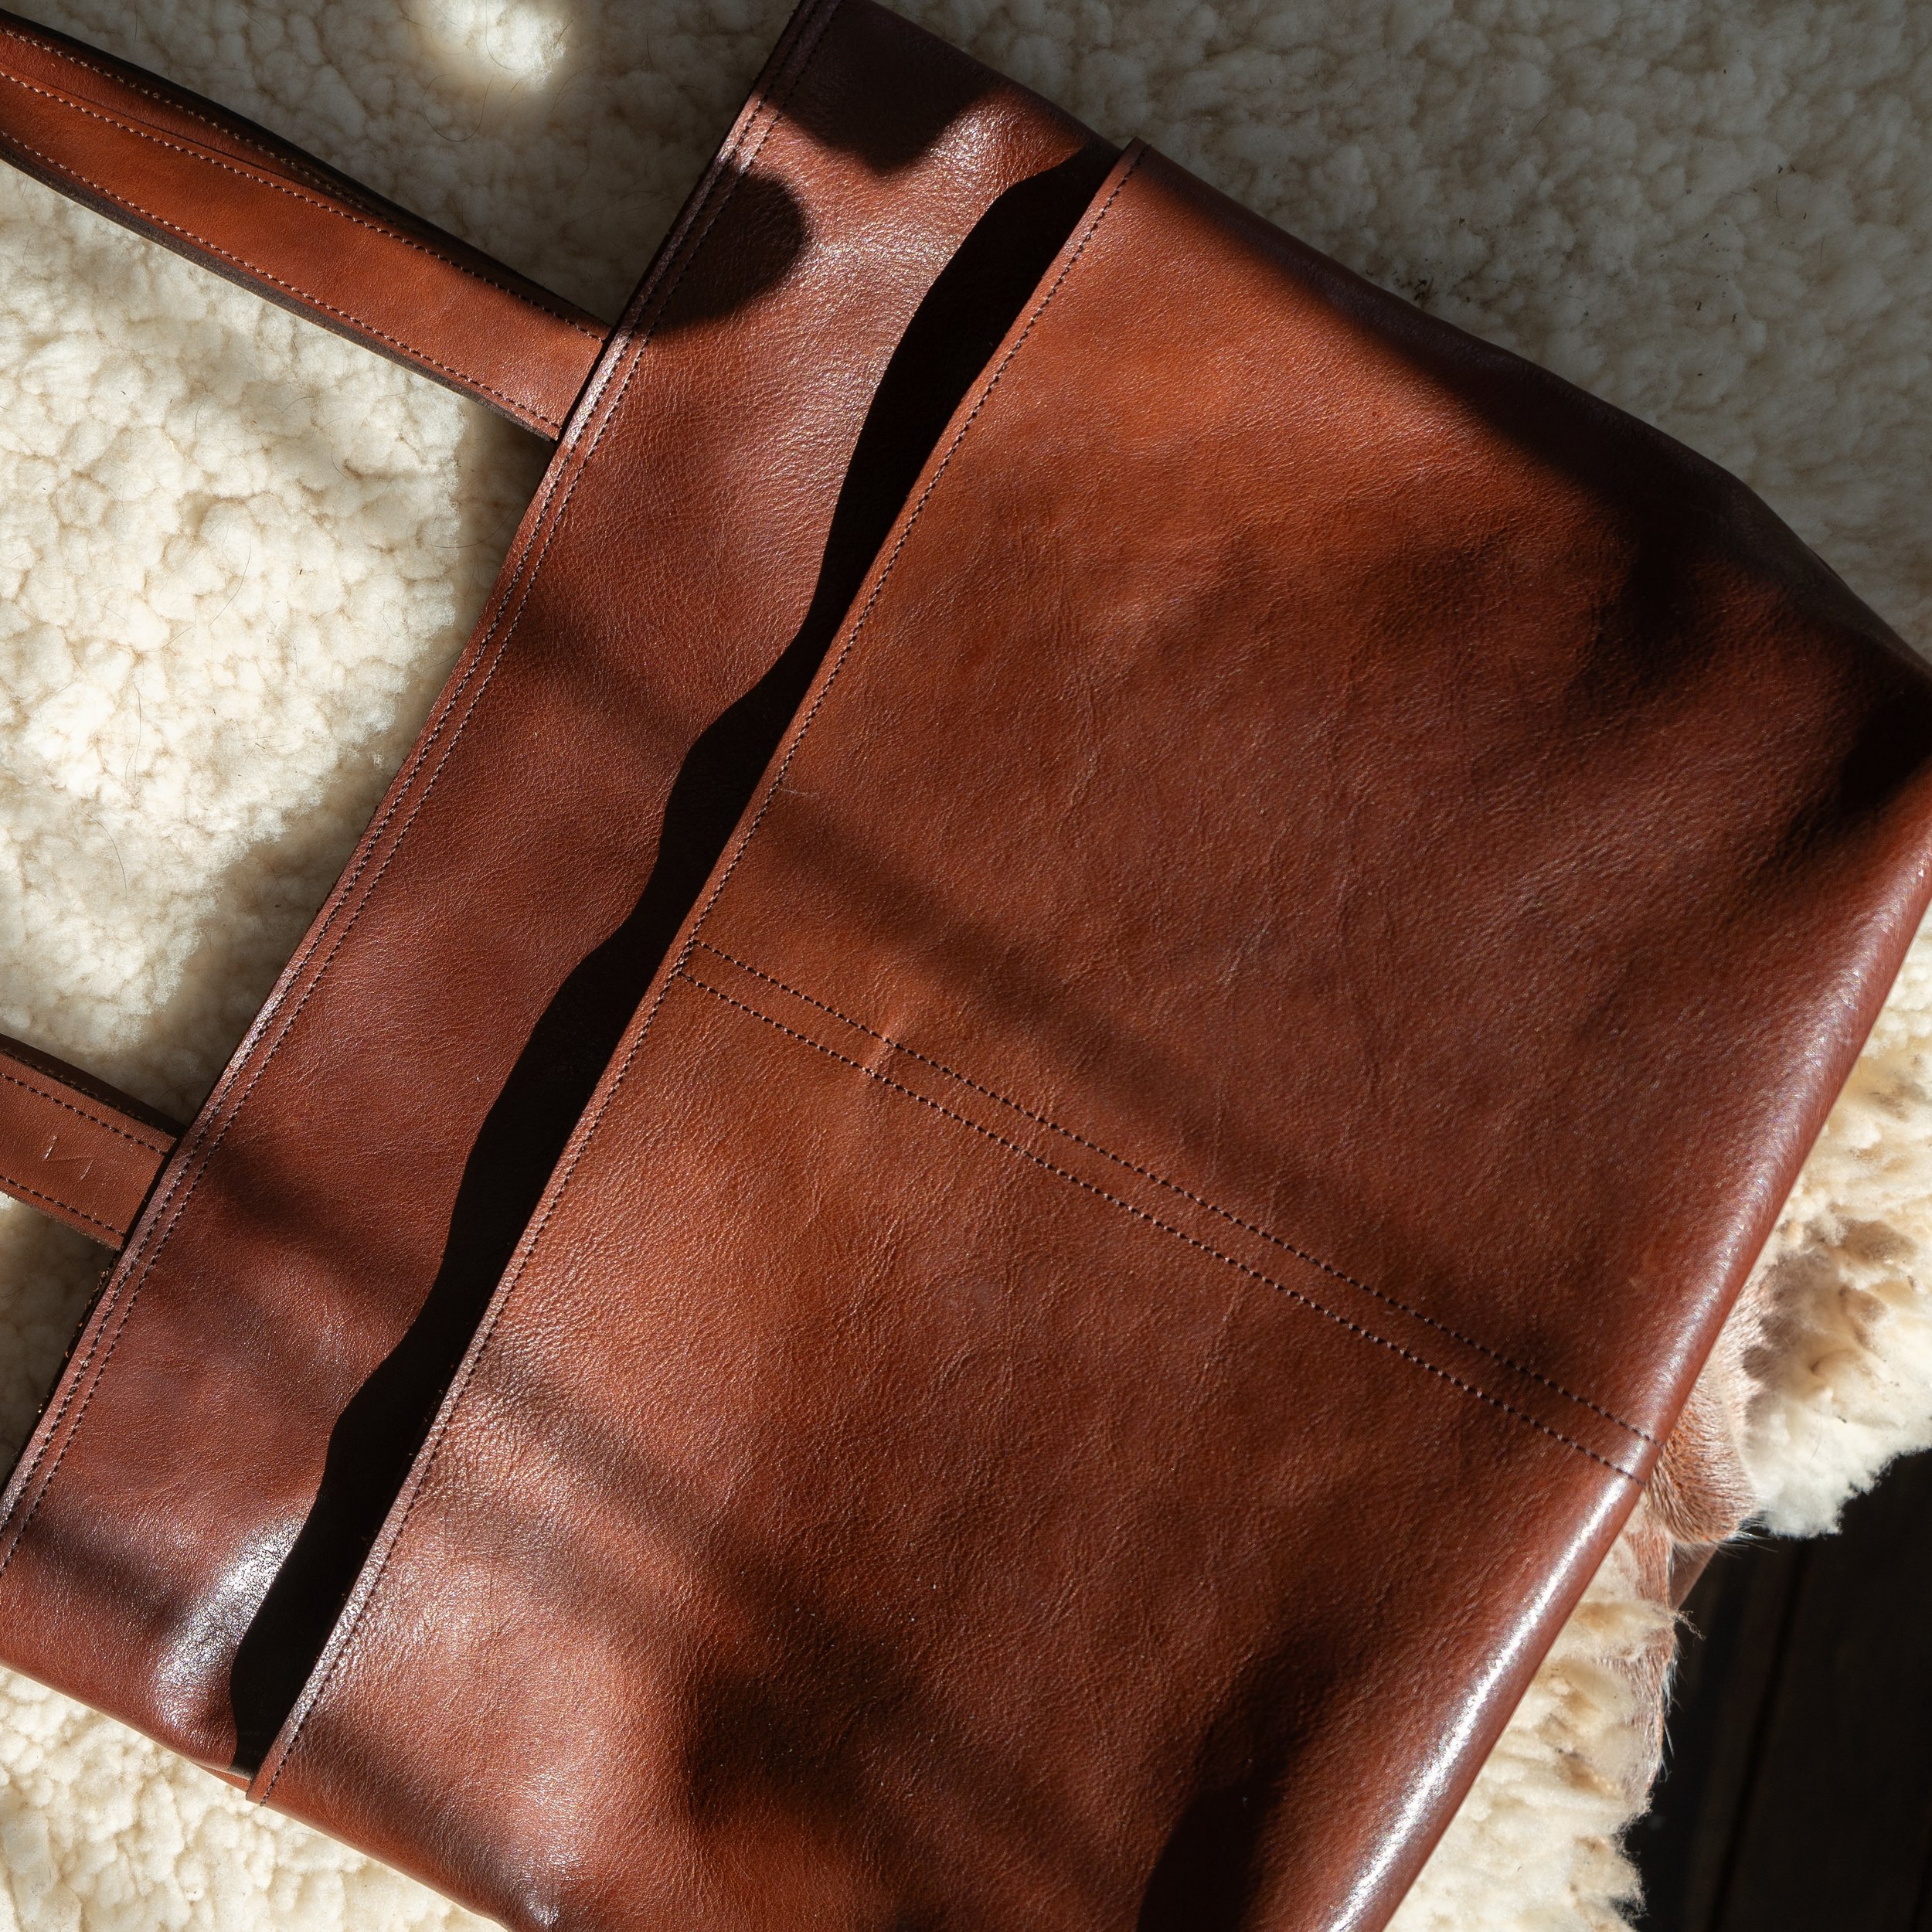 Leather and shearling.

#luxurydesign #luxuryinteriors #luxurylifestyle #leathergoods #luxury #leatherbag #nycstyle #designnyc